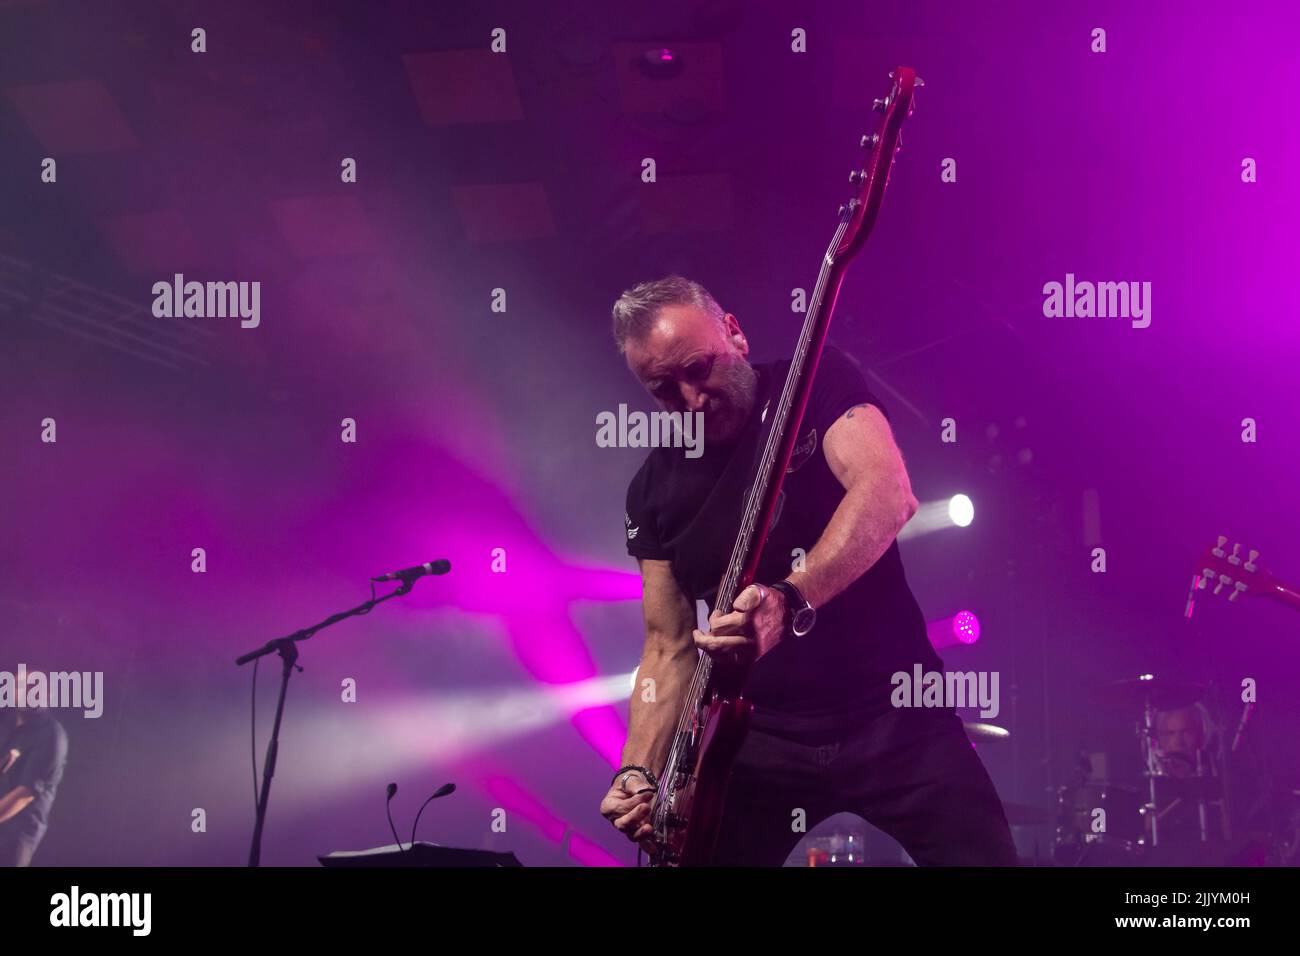 Peter Hook & The Light - Barrowland Glasgow 28th July 2022 Credit: Glasgow Green at Winter Time/Alamy Live News Stock Photo